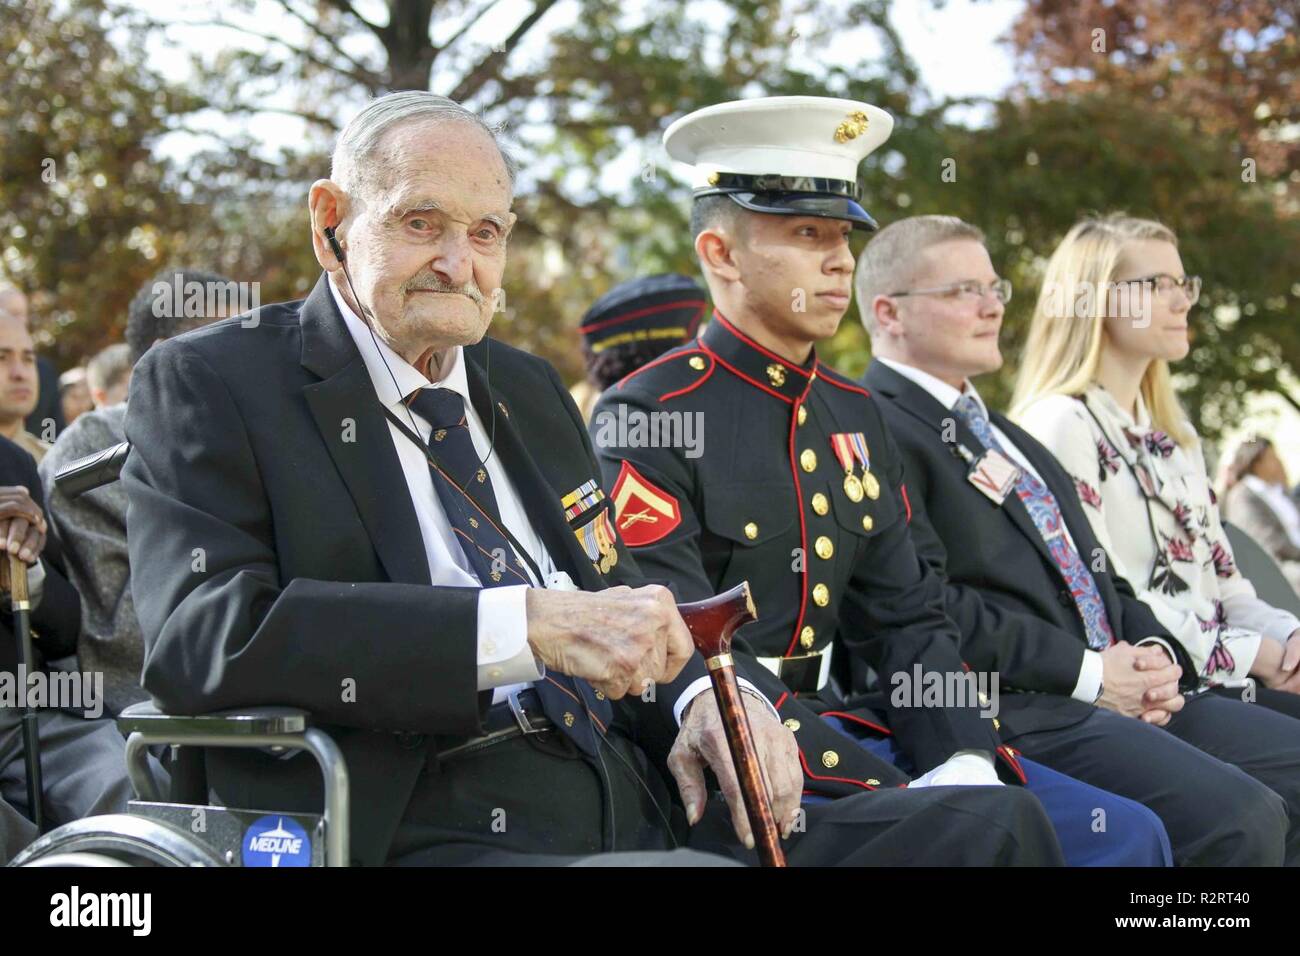 From left, oldest Marine Mr. Albert DeLucien and youngest Marine, Lance Cpl. Marvin Chavez, pose for a photo during a Marine Corps birthday ceremony at the Pentagon, Arlington, Va., Nov. 7, 2018. The ceremony was in honor of the Corps’ 243rd birthday. Stock Photo